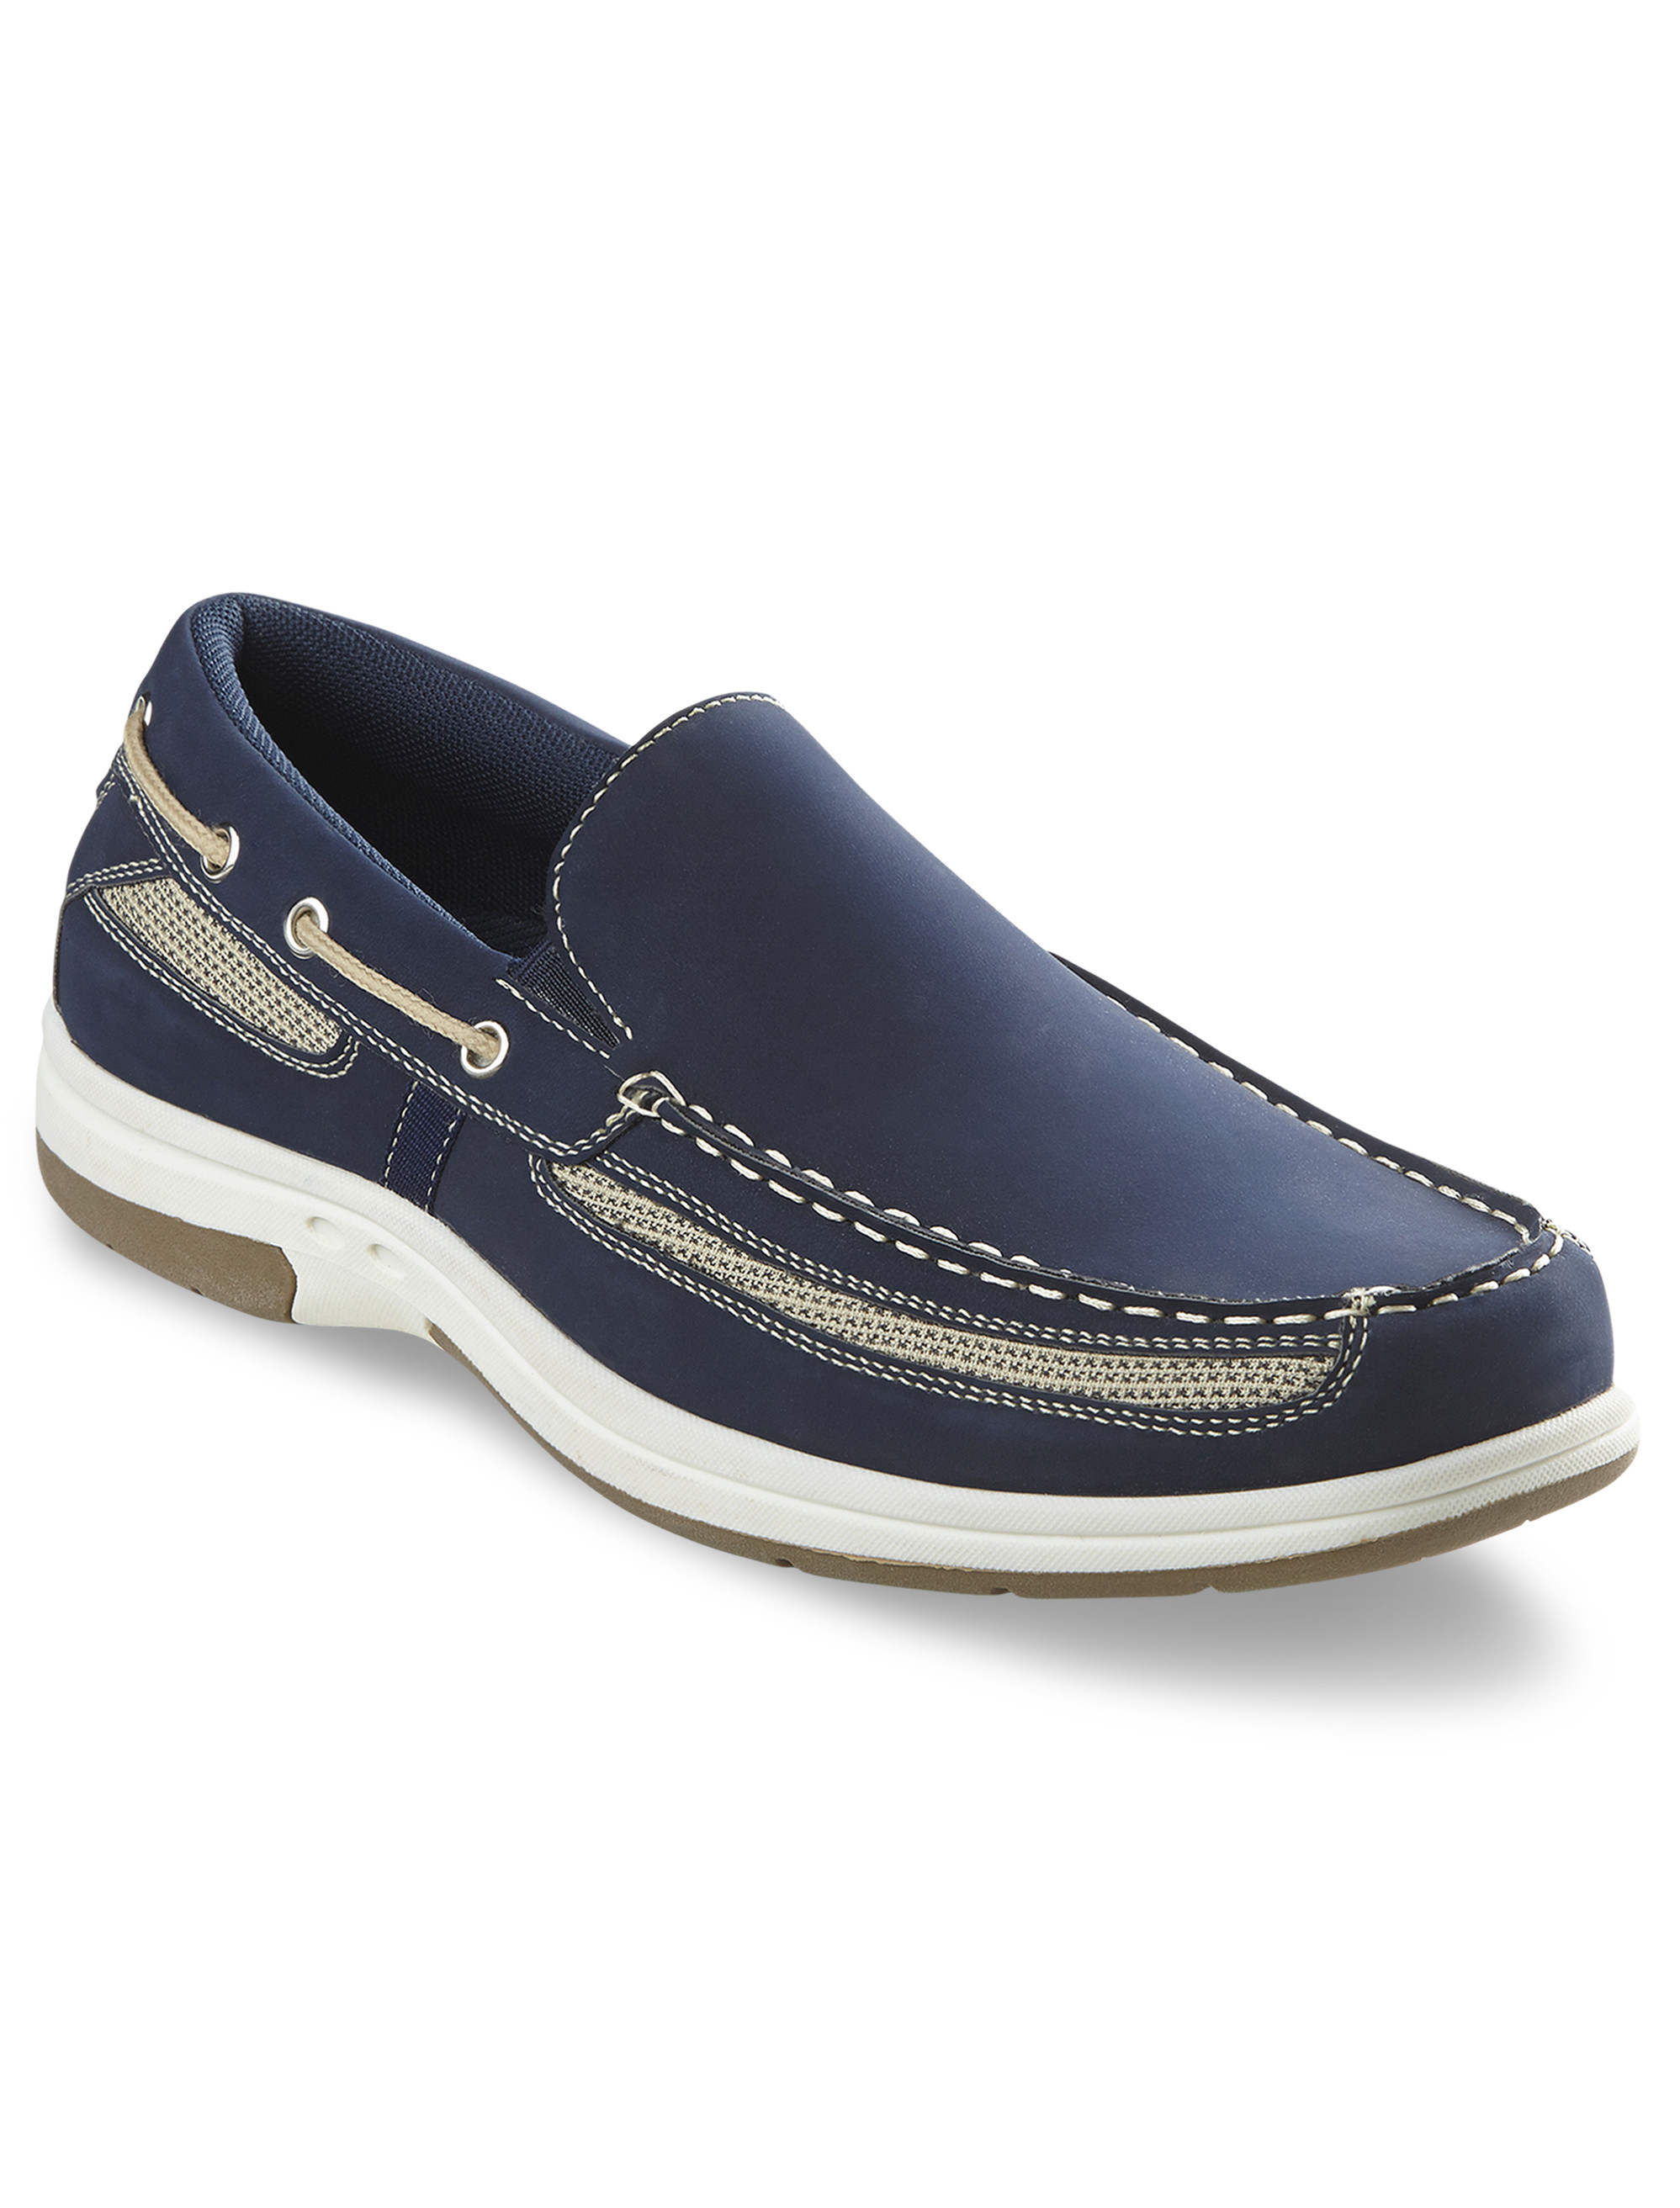 mens casual slip on shoes